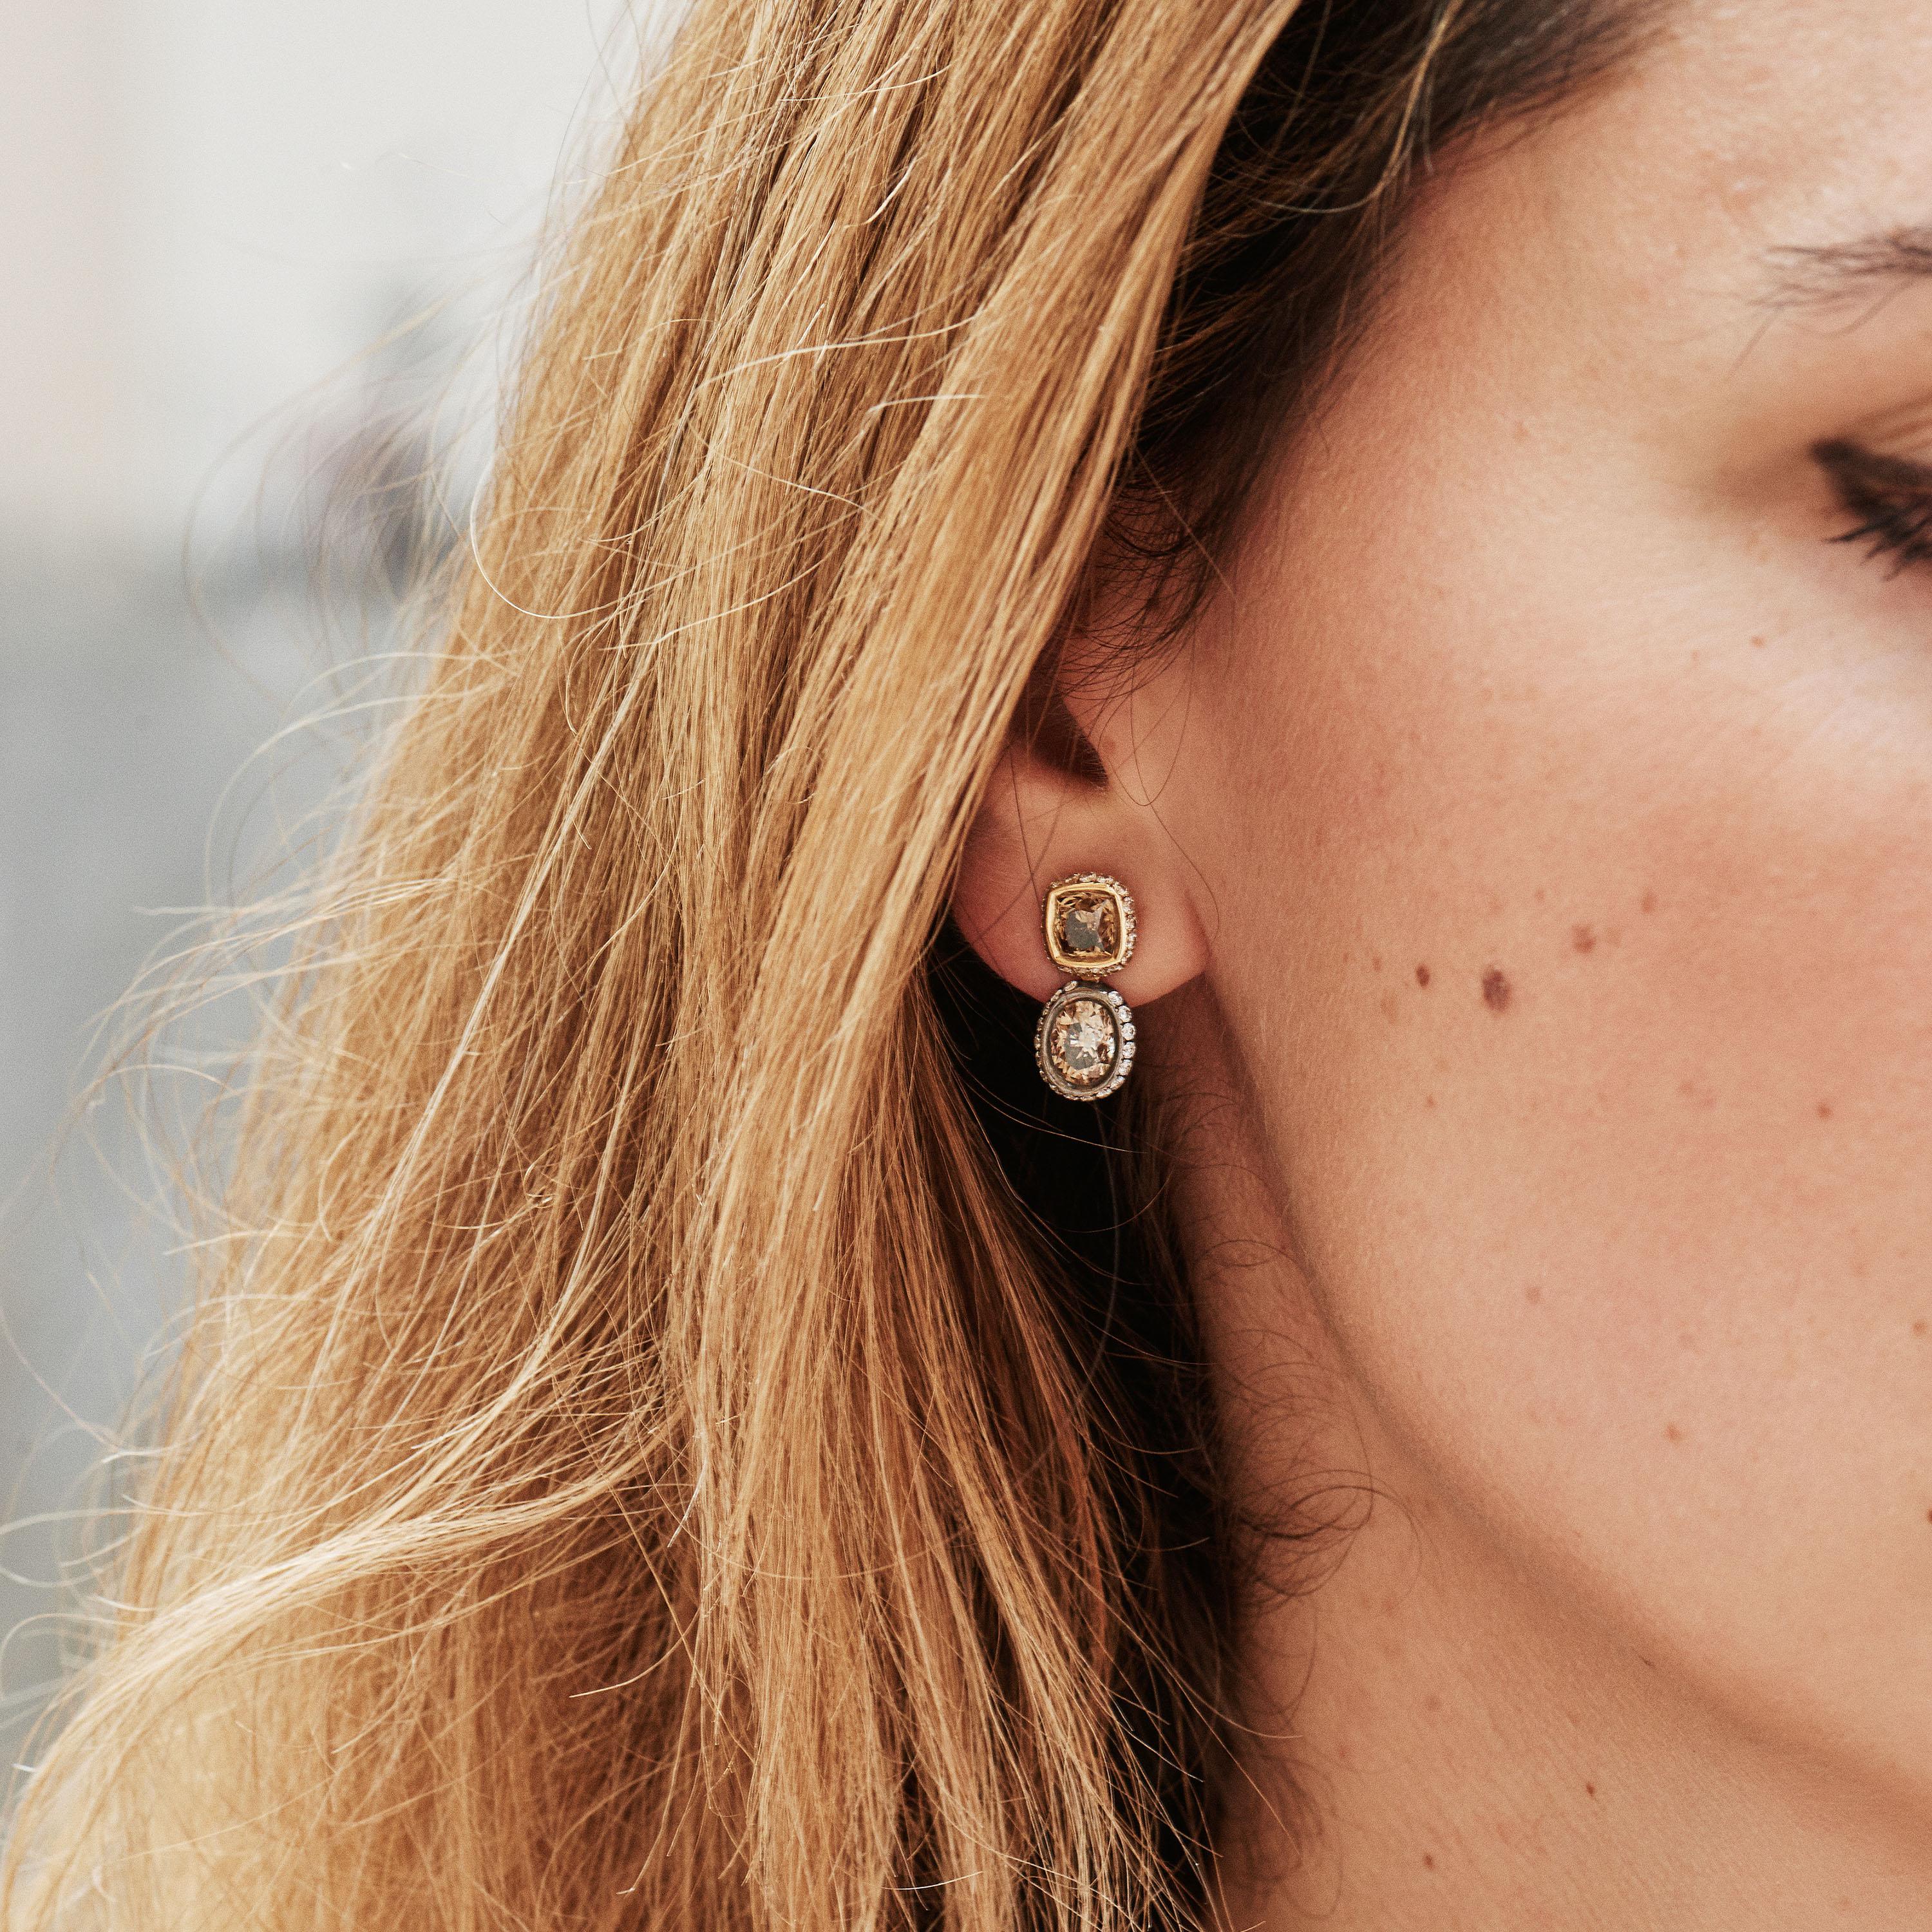 The wonderful AENEA Candy Collection is a perfect example of AENEAs principles: Elegant, day to day wear ready, perfect craftsmanship and our bow to beautiful gemstones.

This very easy to wear earrings fit any outfit, as they are a wonderful